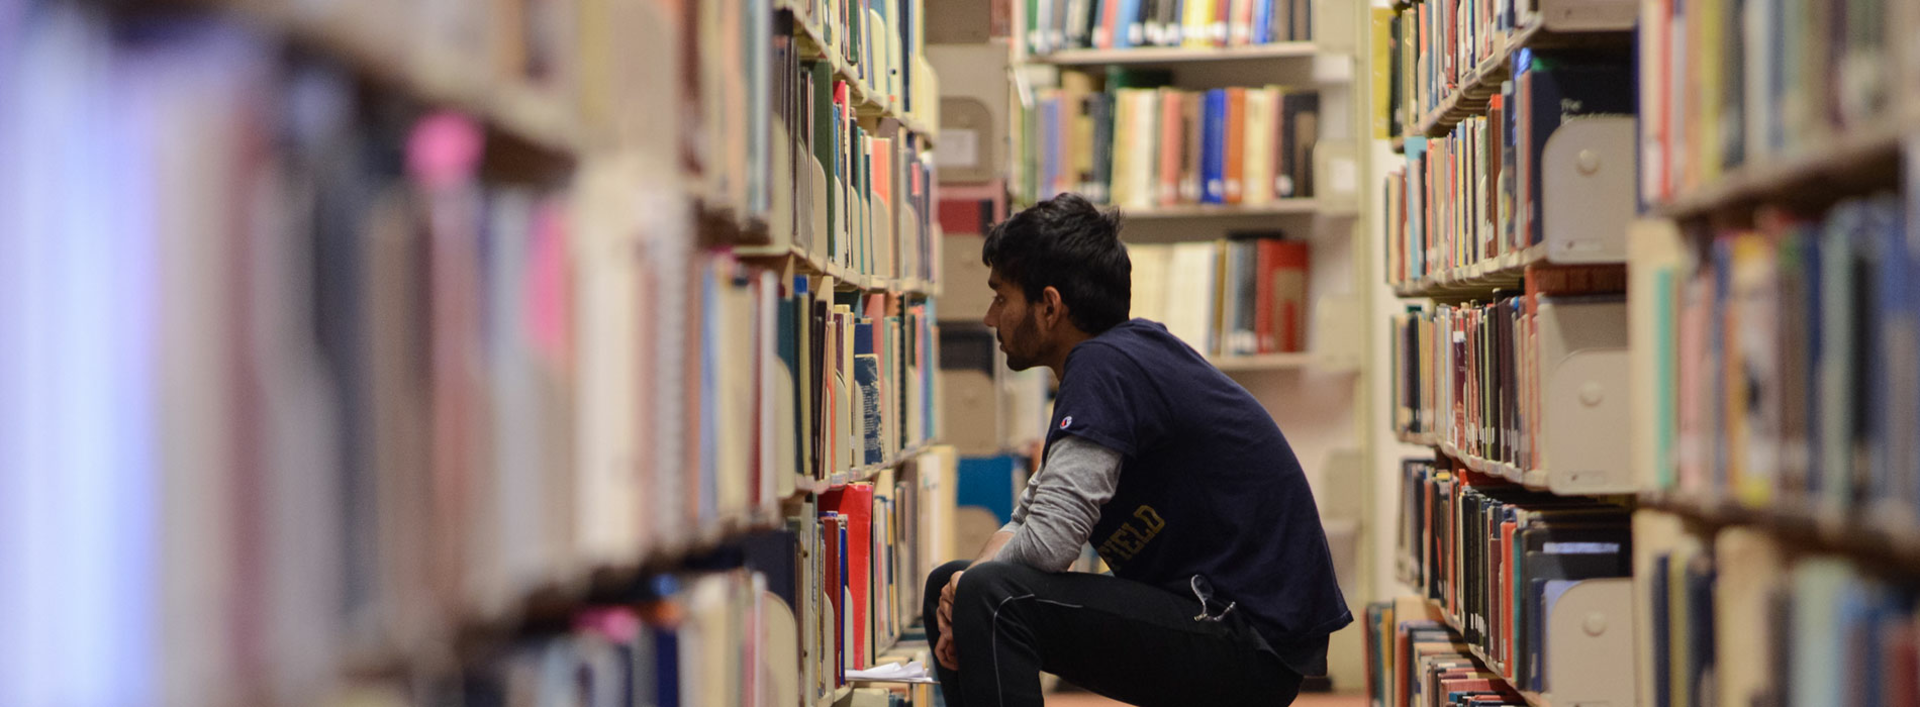 Student looking for books